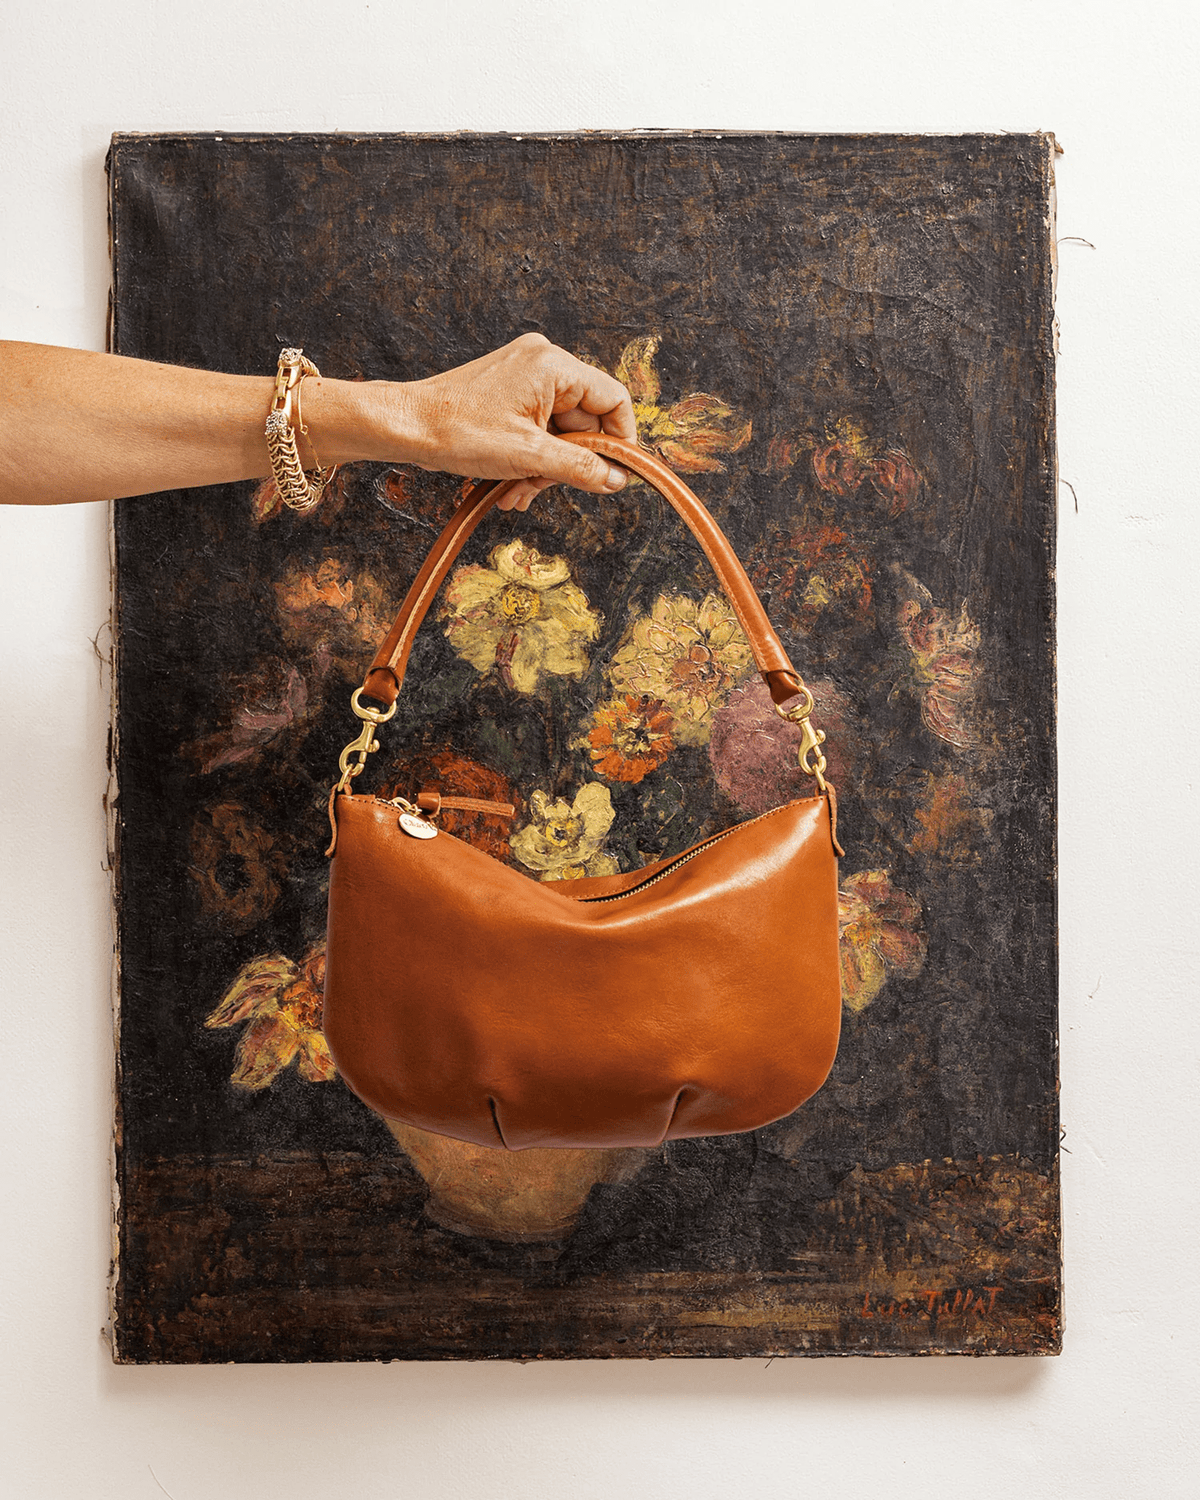 Find the Petit Moyen Messenger in Rustic Miel Clare V. you need! Huge  choice of Petit Moyen Messenger in Rustic Miel Clare V. available